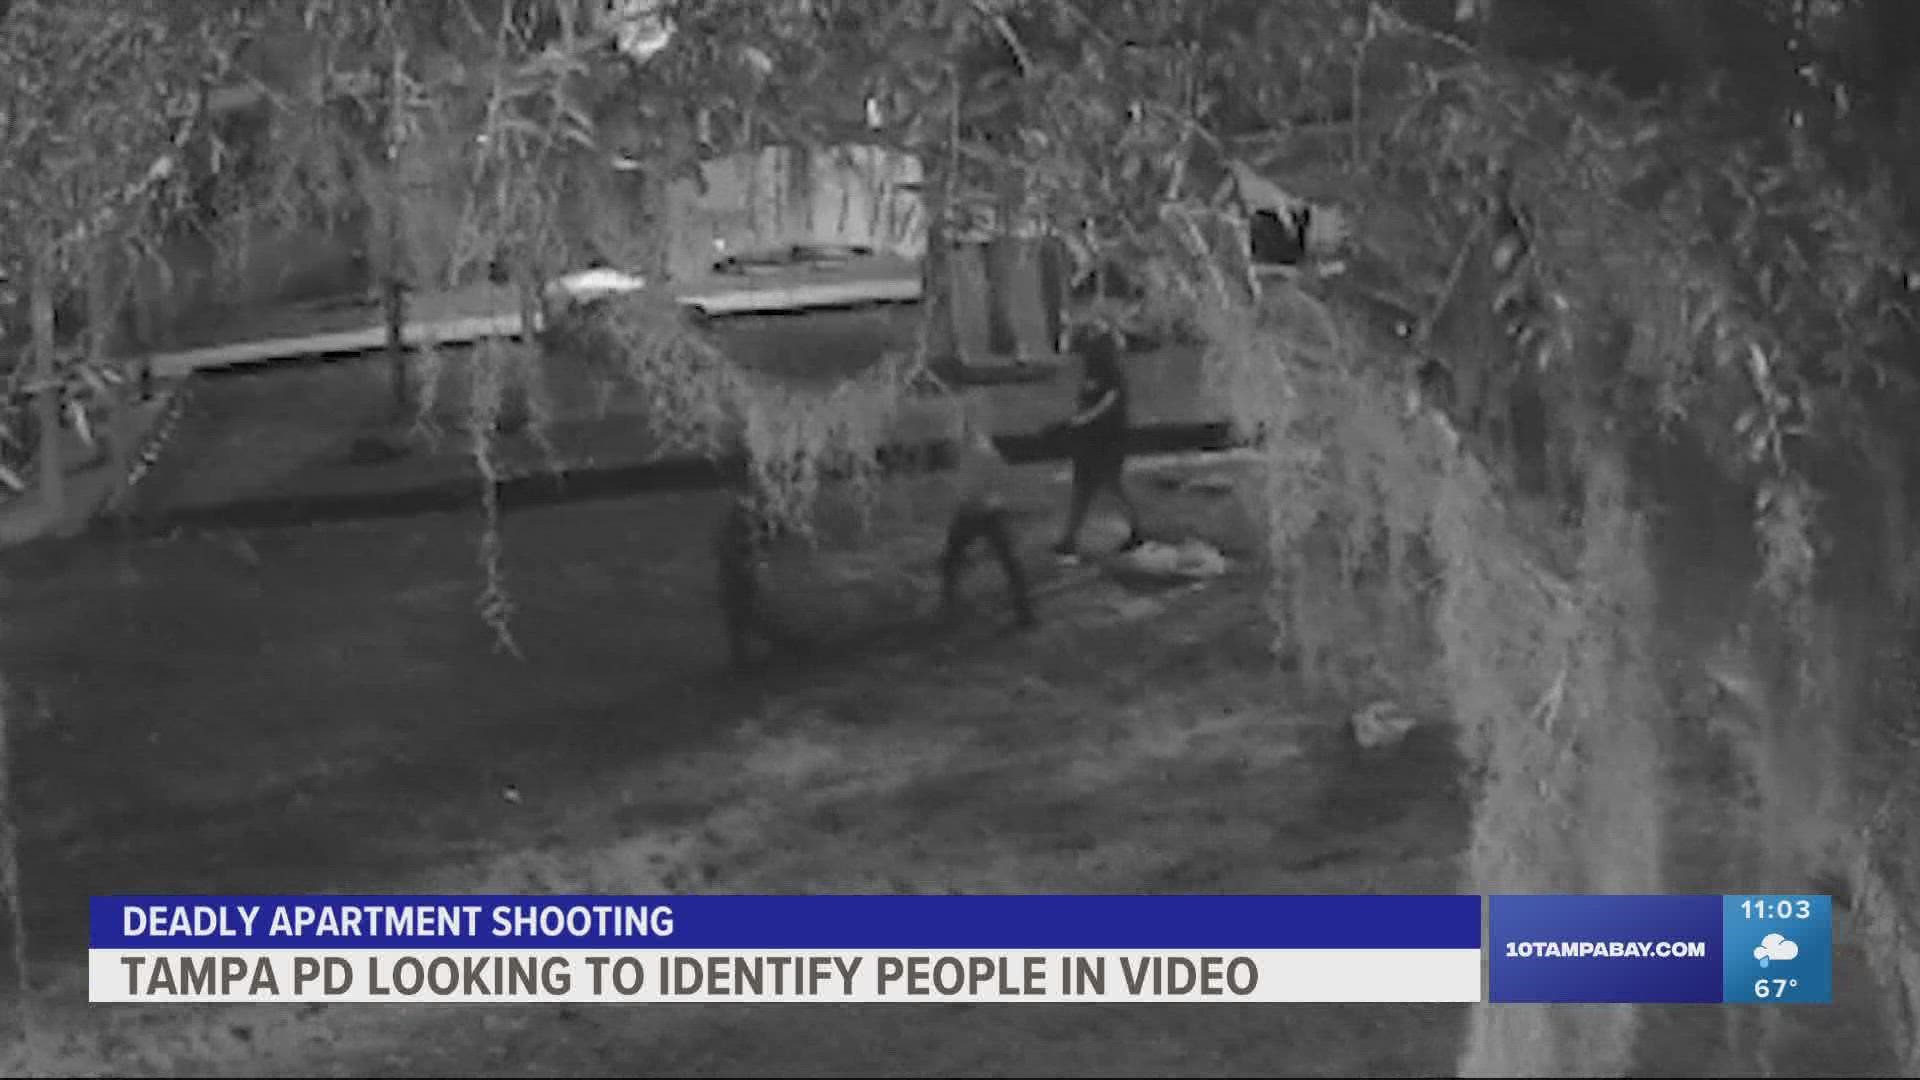 The video shows three people who were at the Silver Oaks Apartments near the time of the shooting.